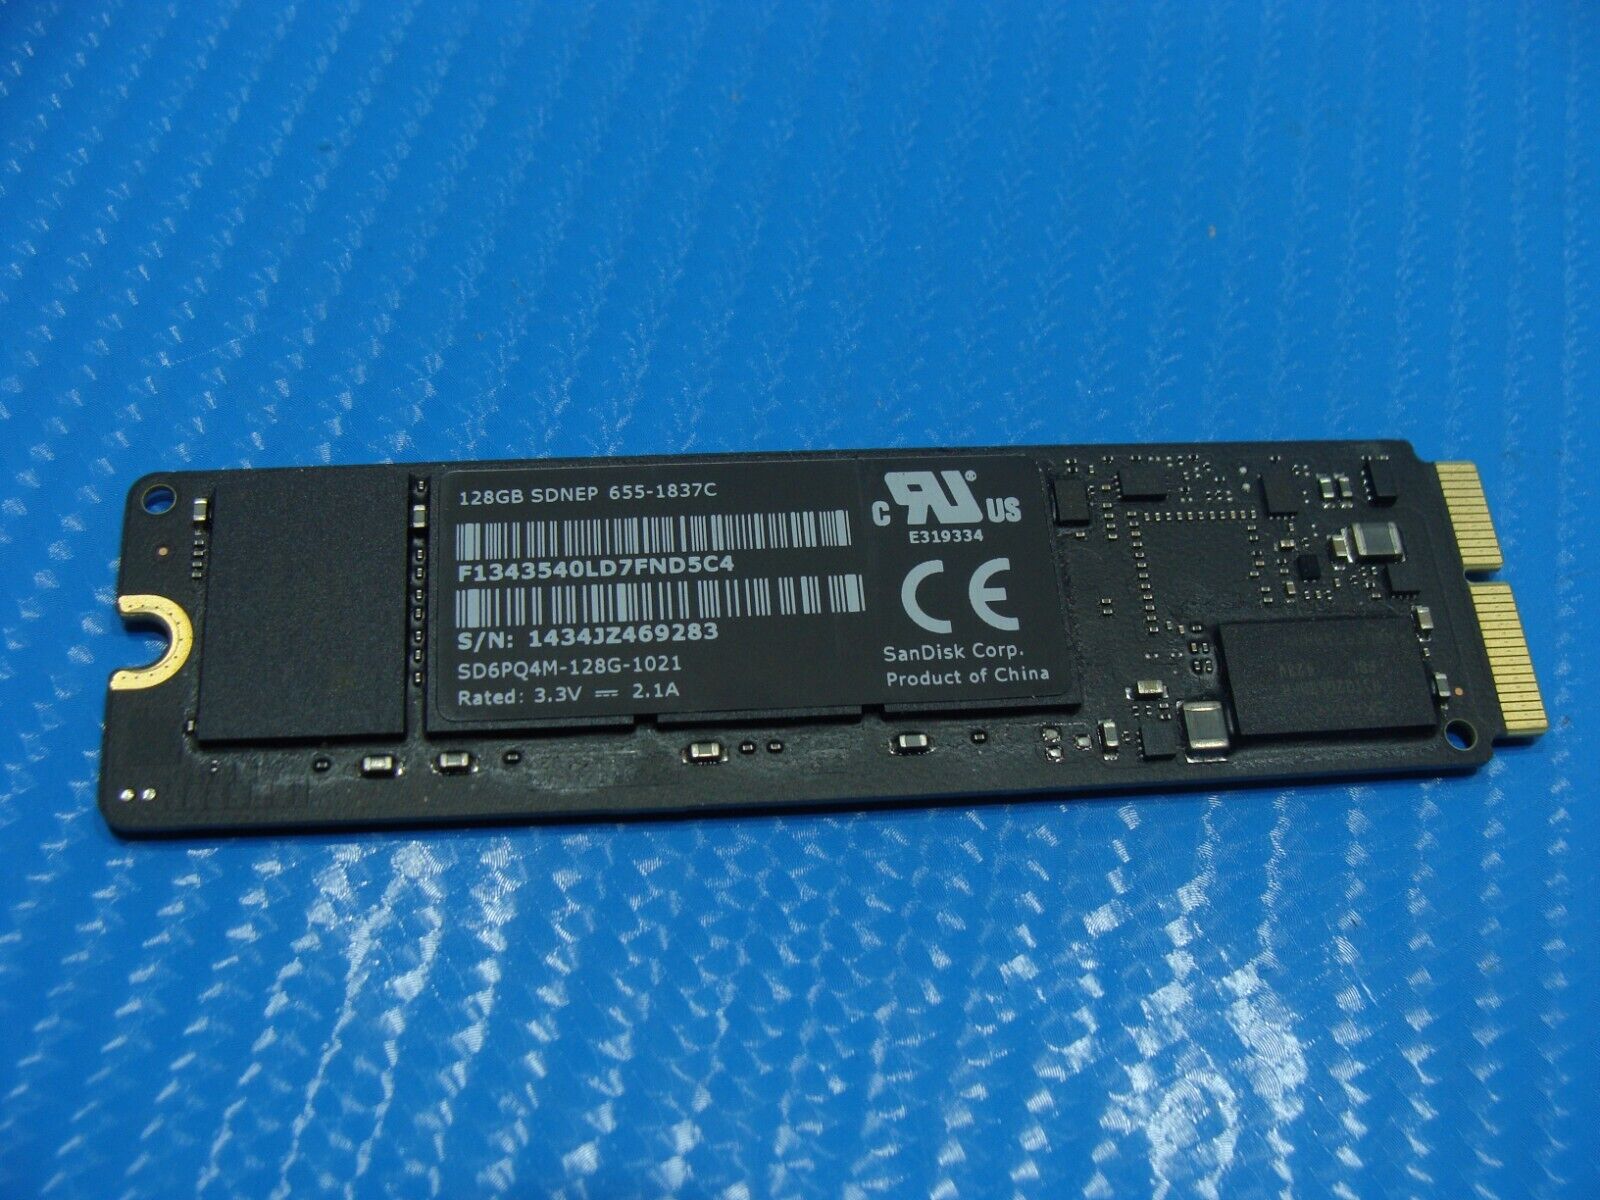 Apple A1466 SanDisk 128GB SSD Solid State Drive SD6PQ4M-128G-1021 655-1837C